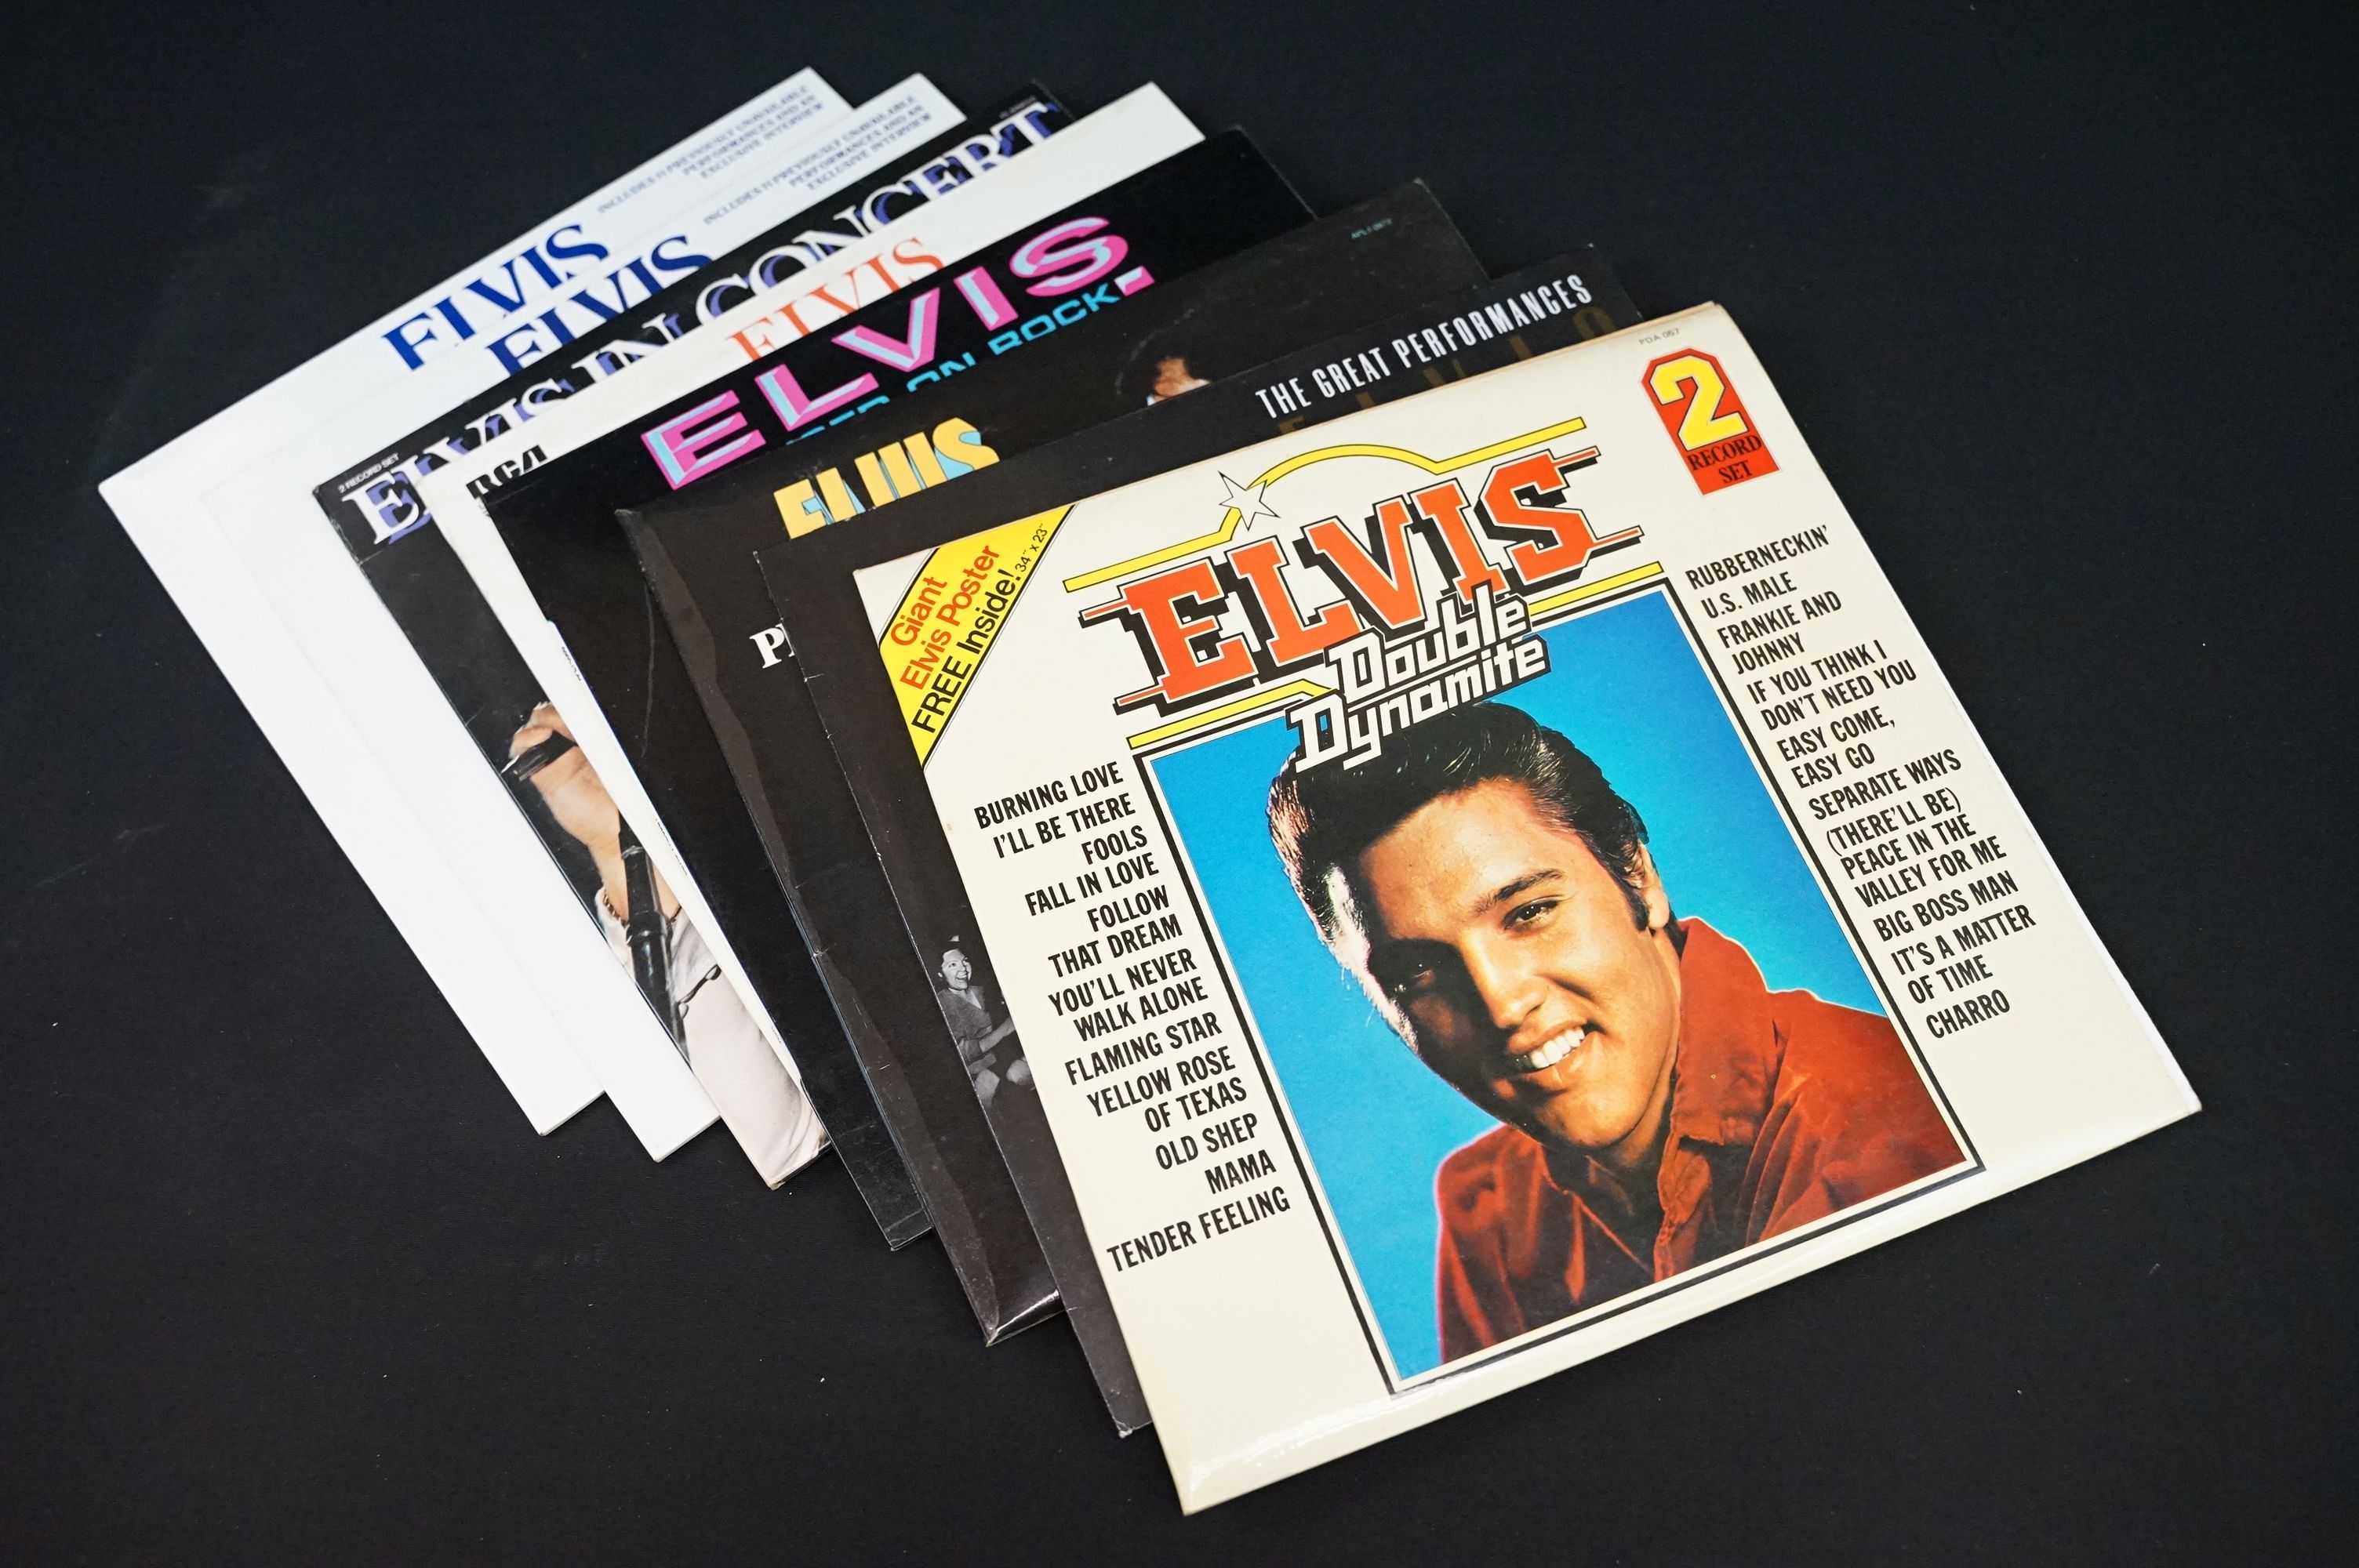 Vinyl - Over 80 Elvis Presley LPs spanning his career including foreign pressings, ltd editions - Image 4 of 5